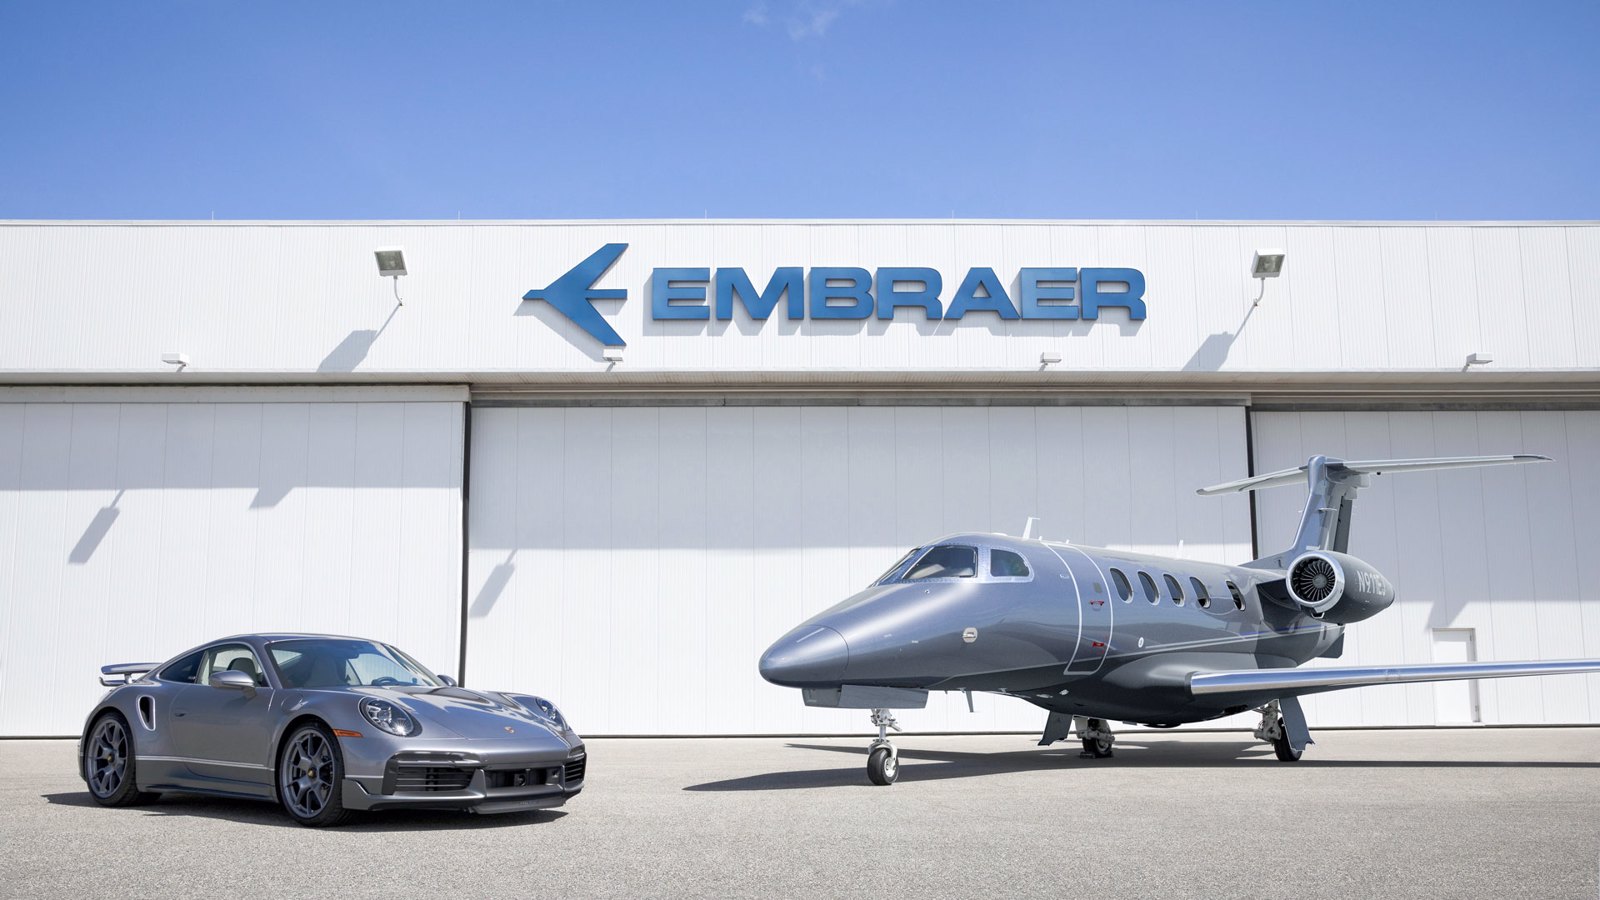 Special edition Embraer Phenom 300E business jet and customised Porsche 911 Turbo S.